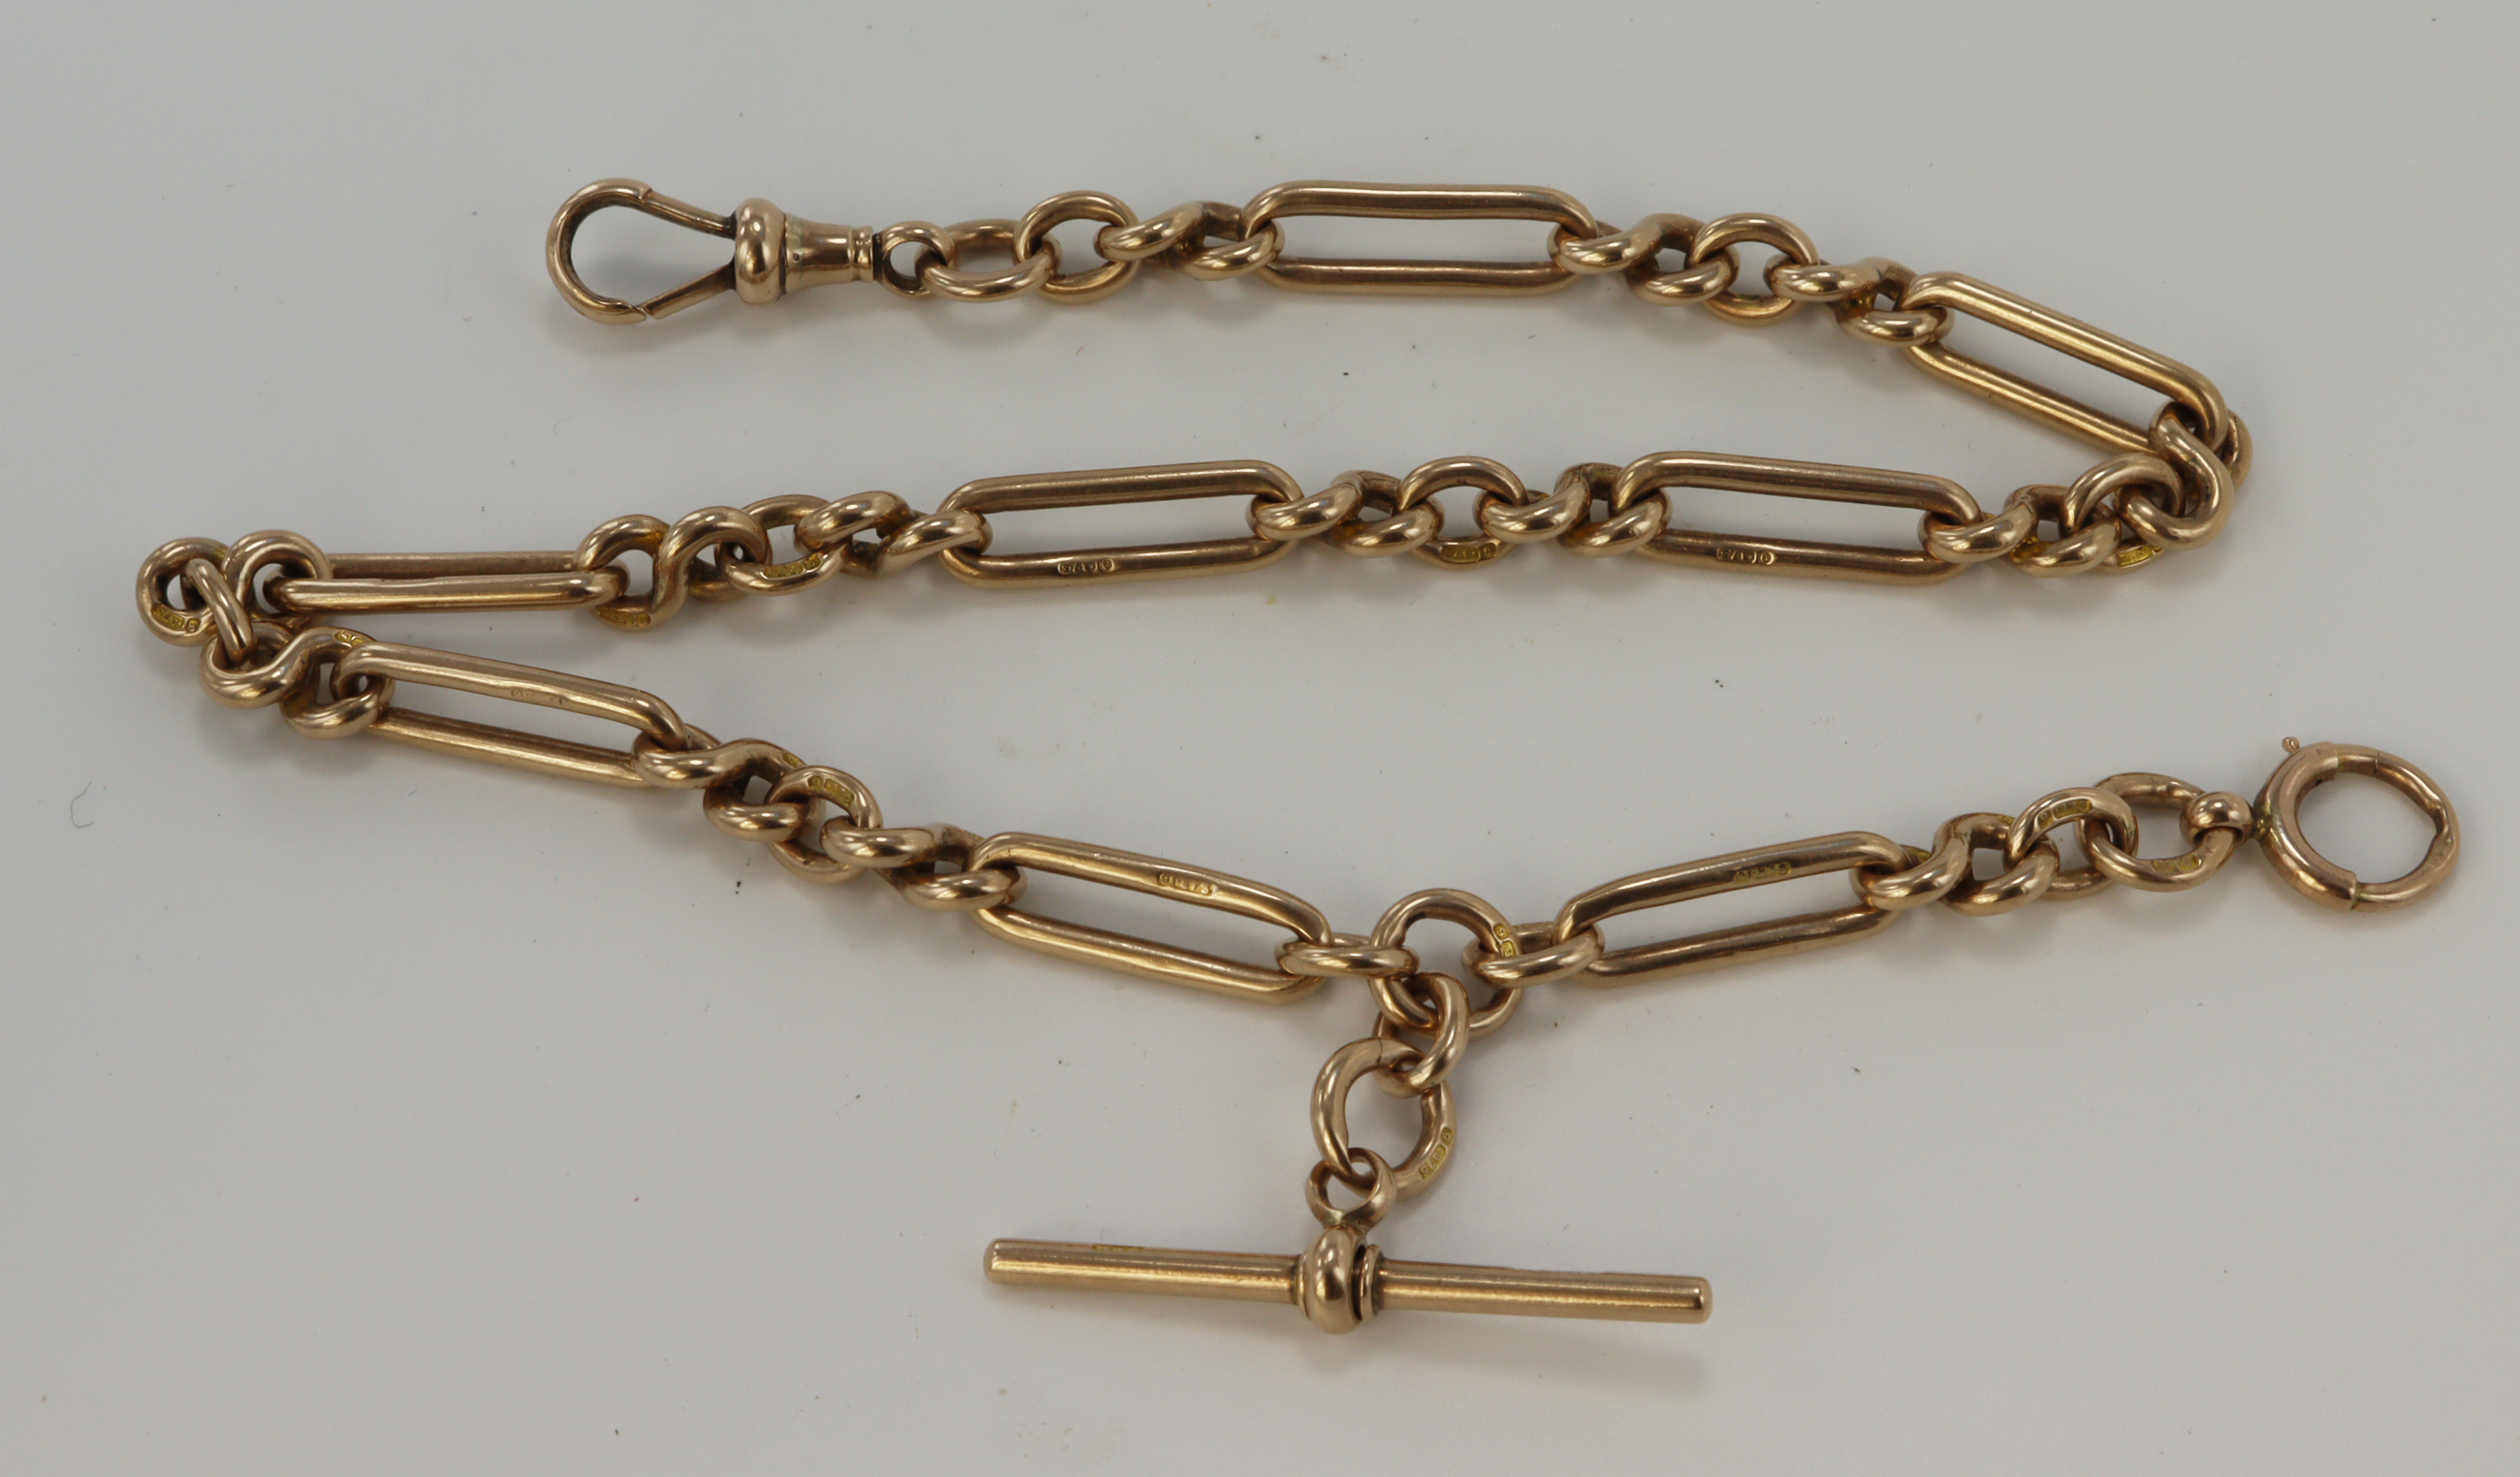 9ct "T" bar pocket watch chain (all links stamped). Length approx. 36.5cm, weight 42.7g